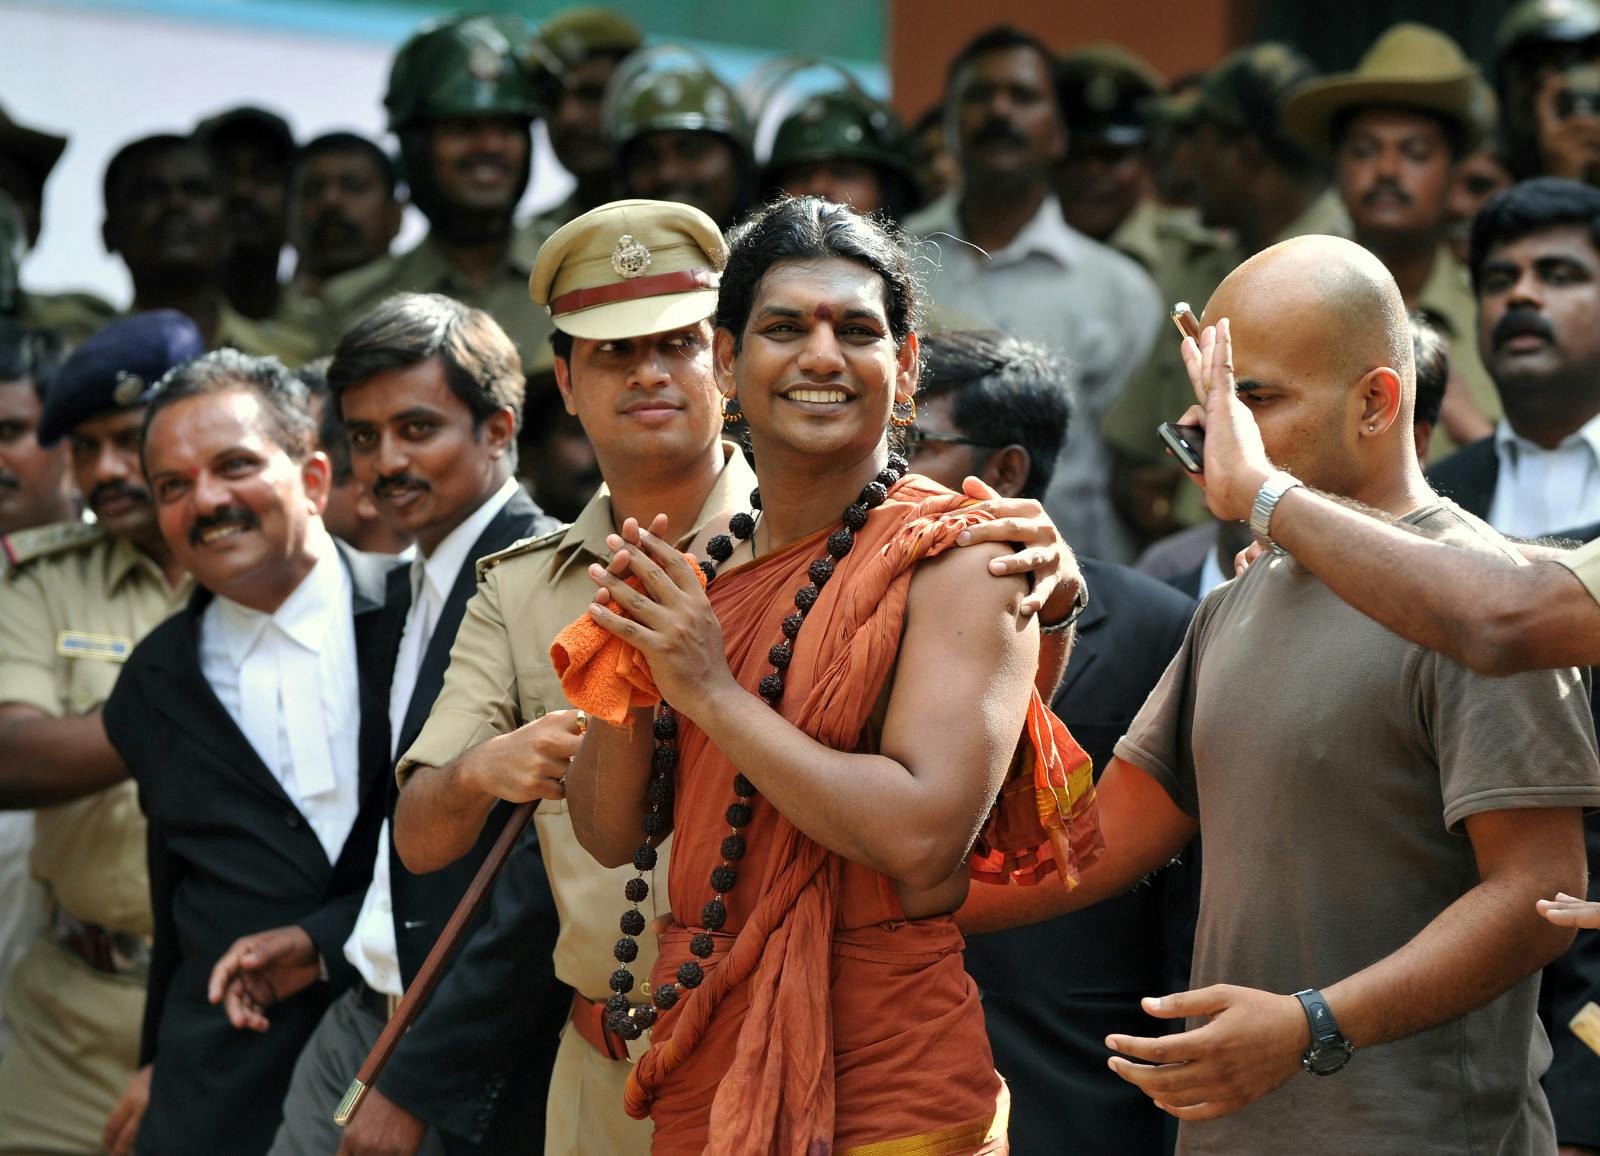 Police escort Swami Nityananda (C) after appearing for his bail plea at the judicial magistrate court at Ramanagar District, some 50 kms from Bangalore, on June 14, 2012. Police ordered Swami Nithyananda, 35, to be detained for questioning after five women accused him of abusing them at his ashram in Karnataka. (Manjunath Kiran/AFP/Getty Images)